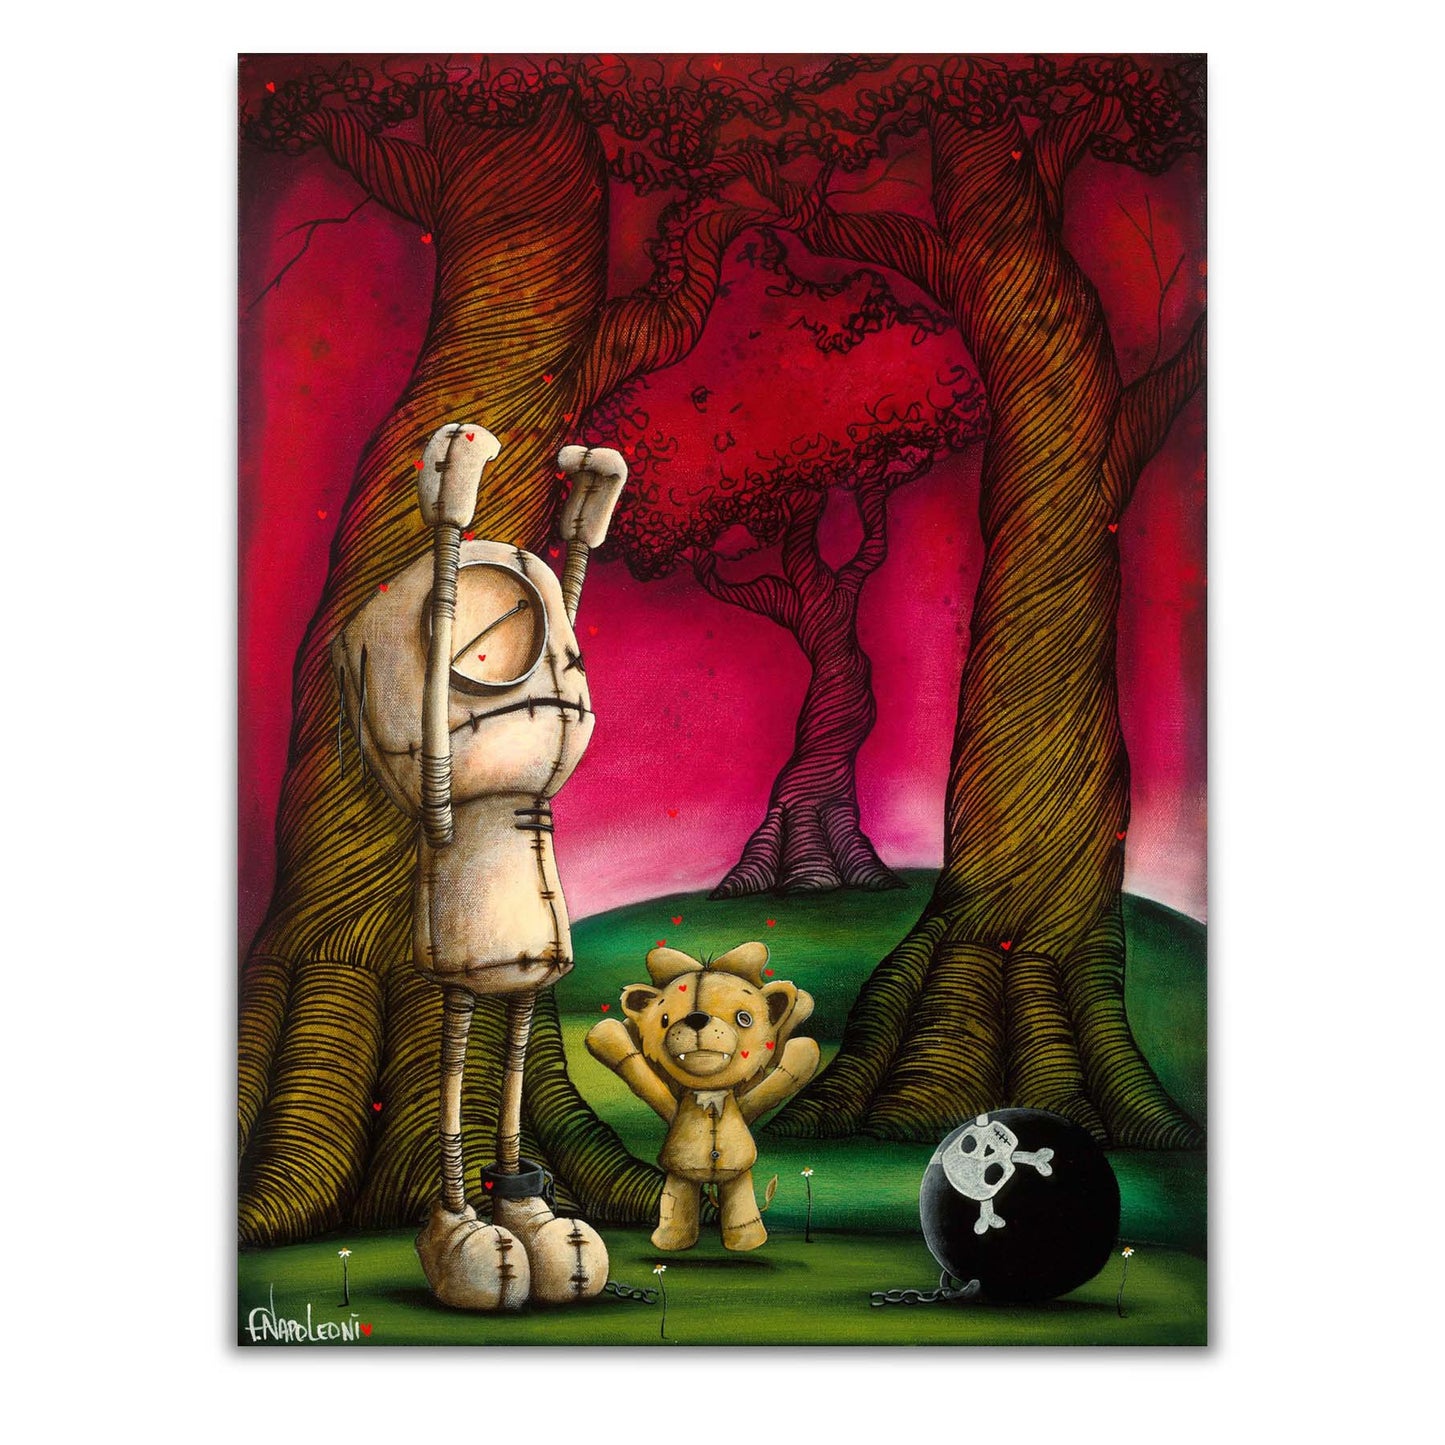 Fabio Napoleoni "Free From All That is Toxic" Limited Edition Paper Giclee